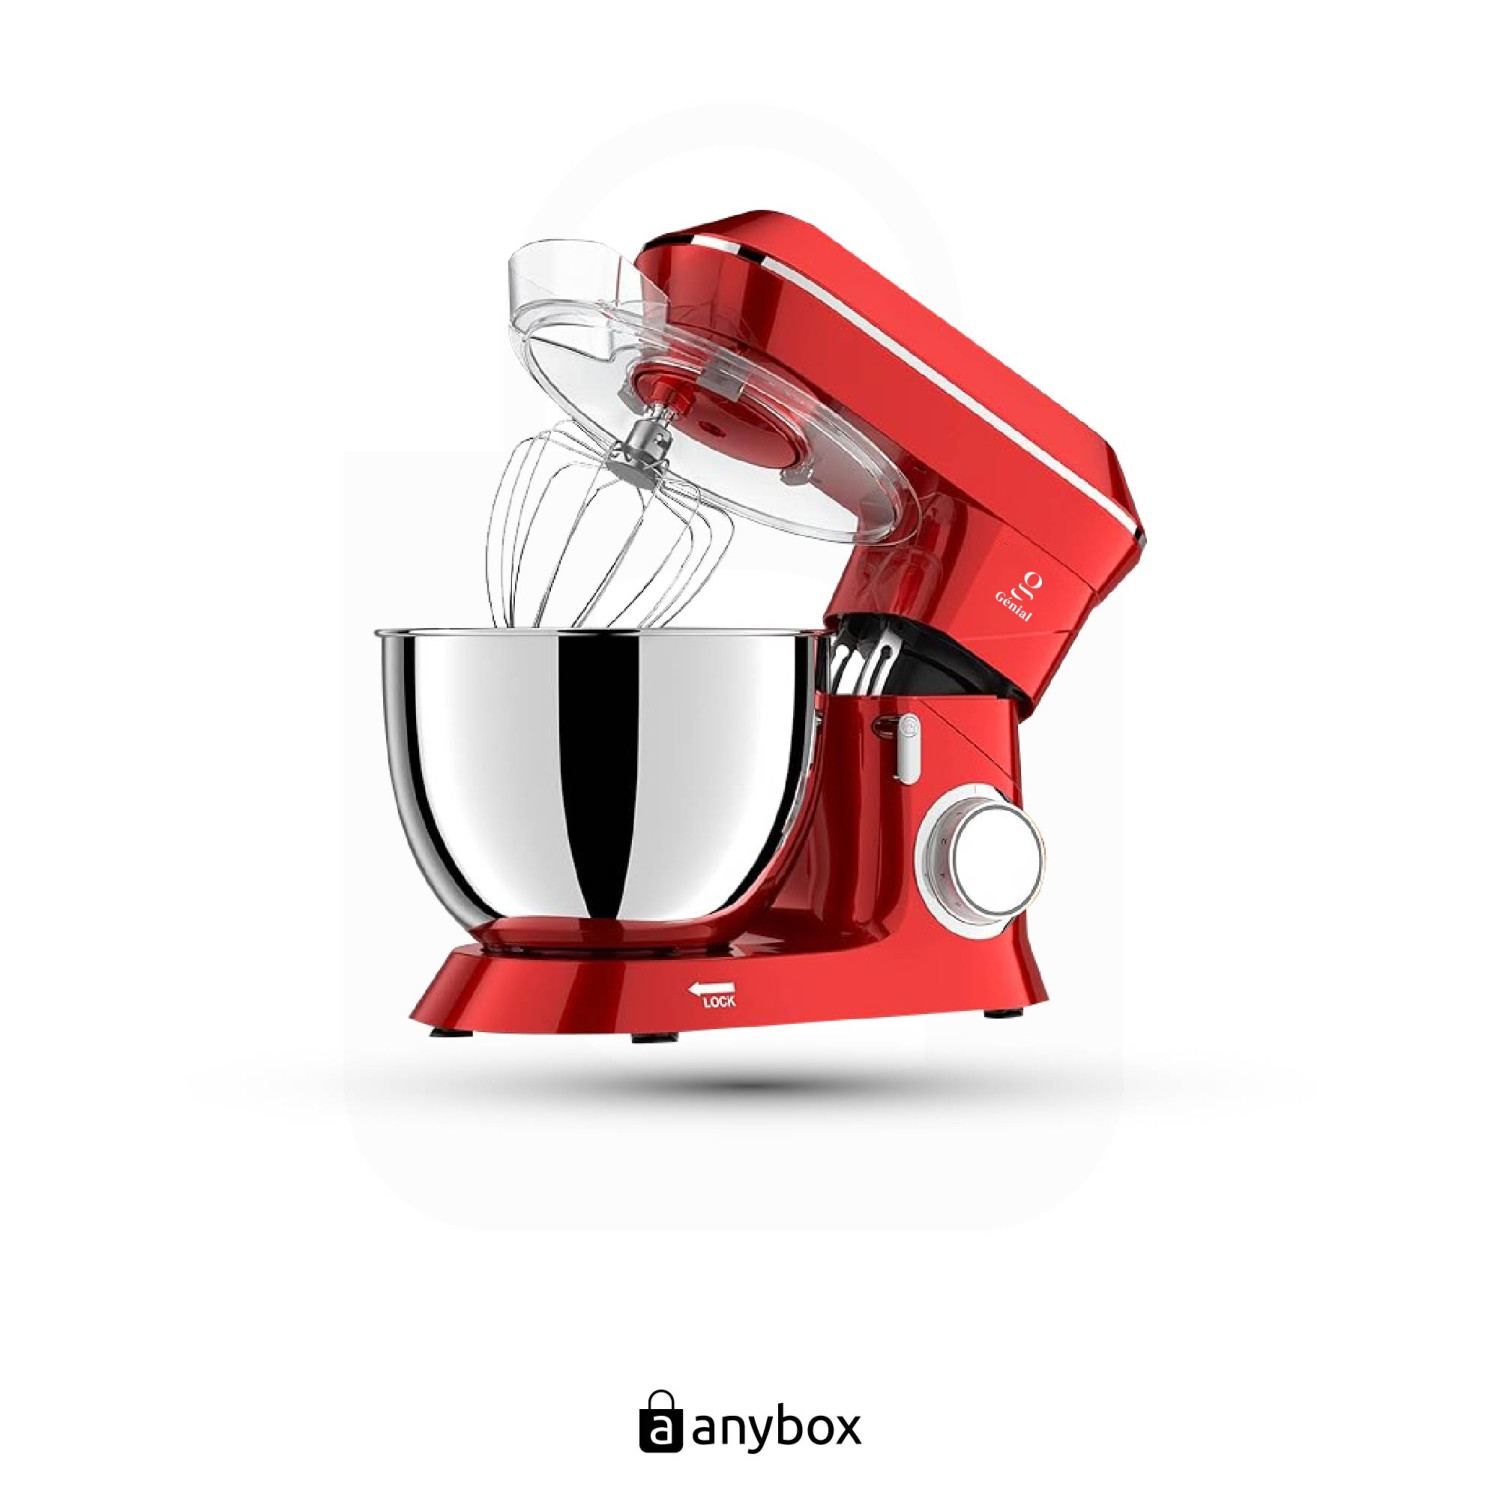 genial stand mixer 8L